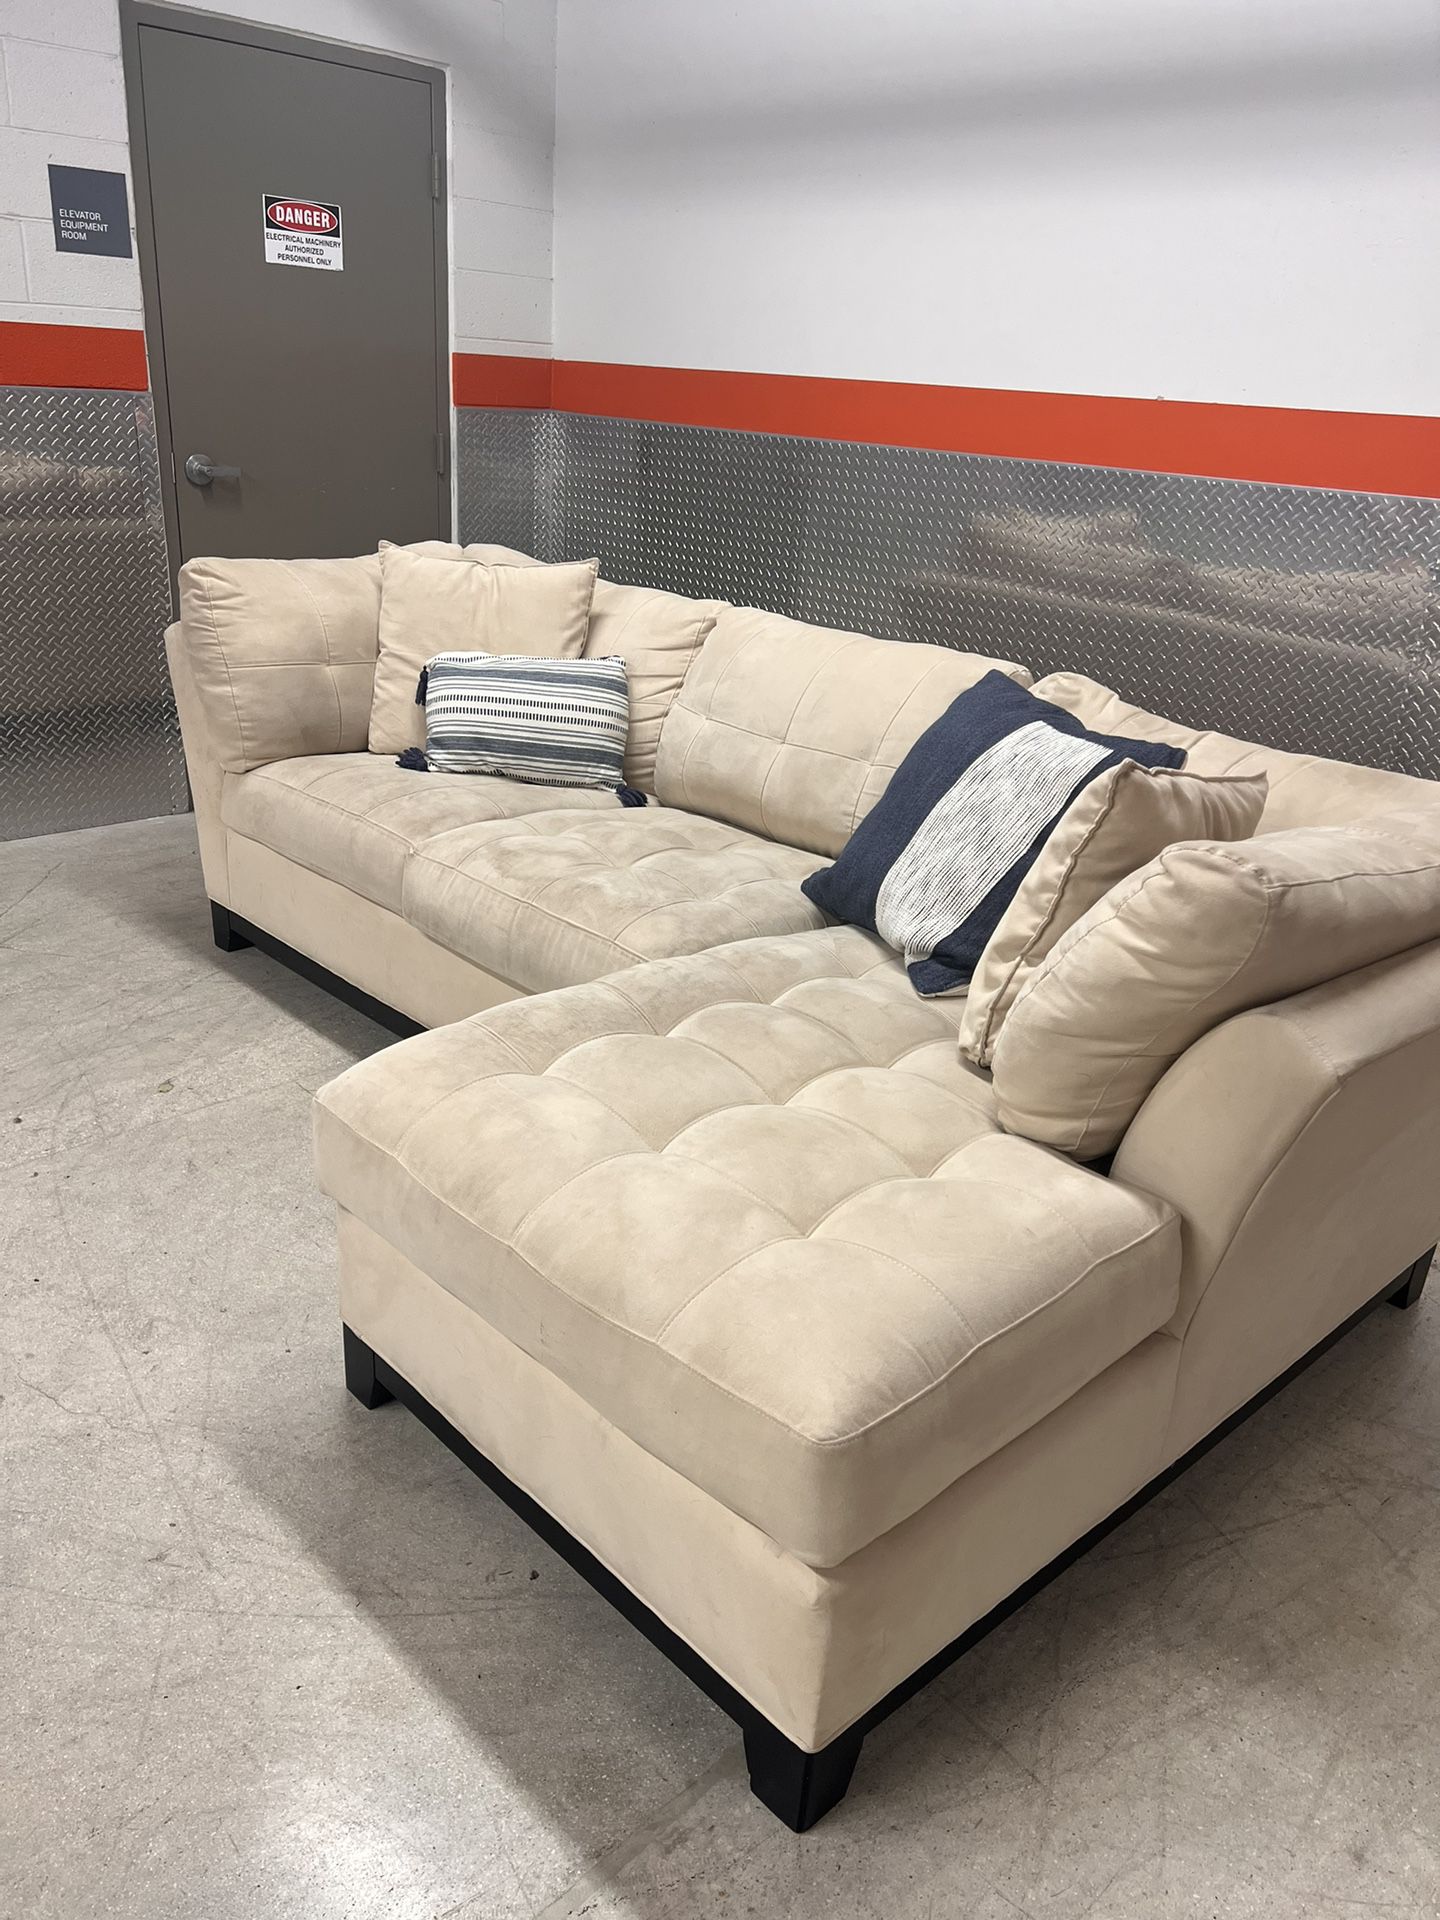 WOW! Cream Cindy Crawford Sectional Couch ONLY $335 ($1,750 Retail!!) Free Delivery! 🚚 